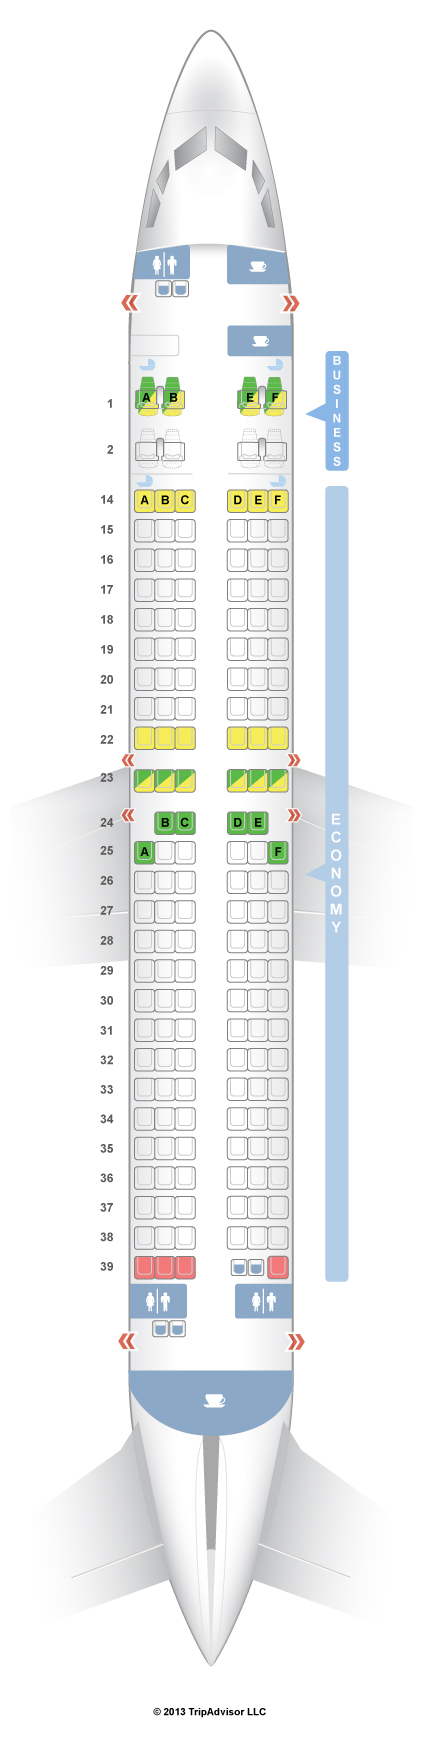 Boeing 737 800 Seating Chart